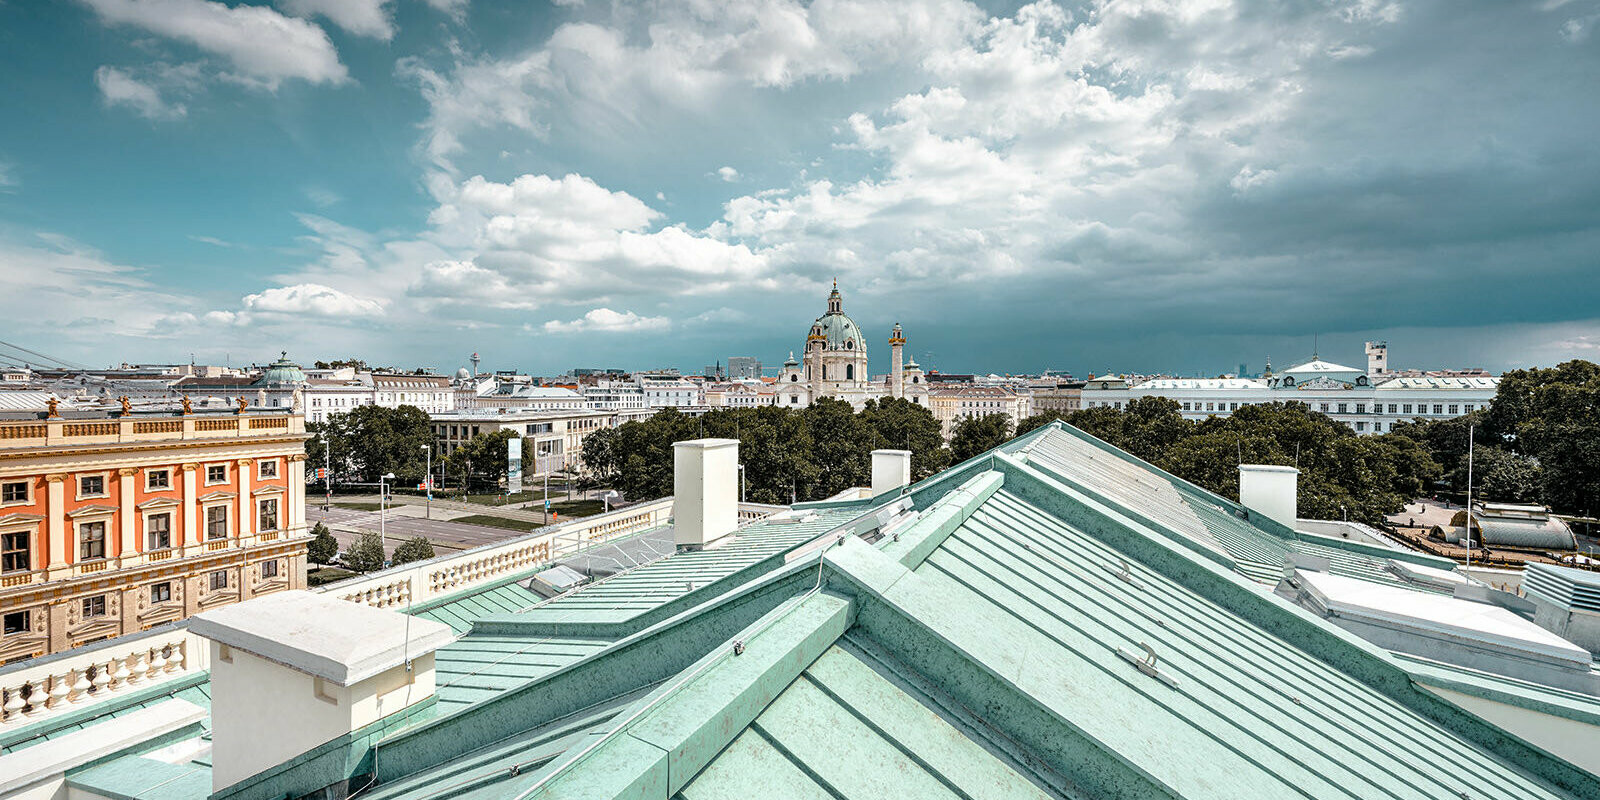 Close-up of the PREfalz roof in P.10 patina green. The Künstlerhaus is situated in Vienna and is surrounded by other buildings at the Karlsplatz.